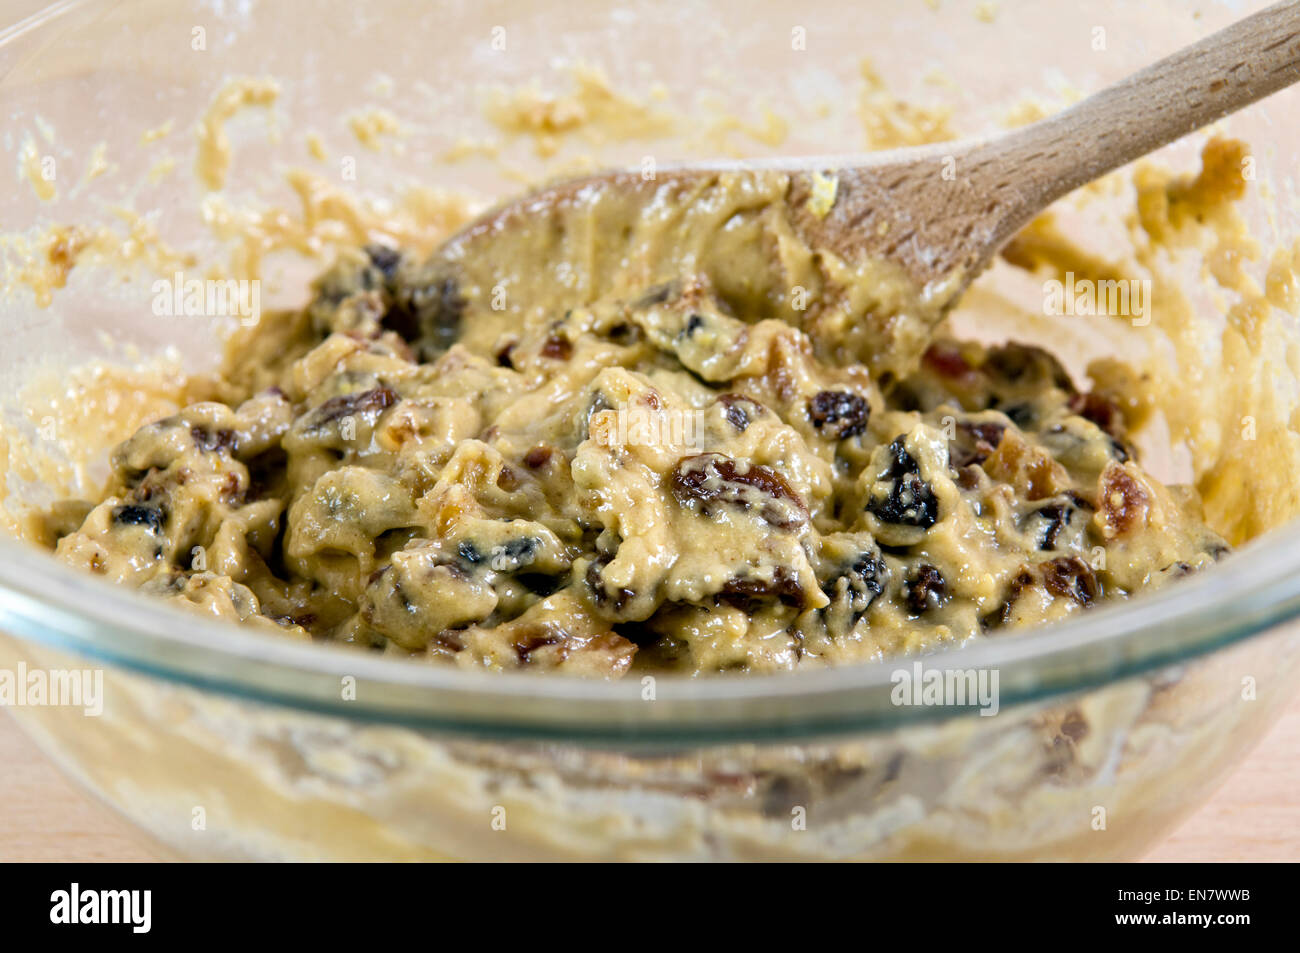 Fruit cake, or fruit loaf mixture in glass bowl with wooden spoon Stock Photo